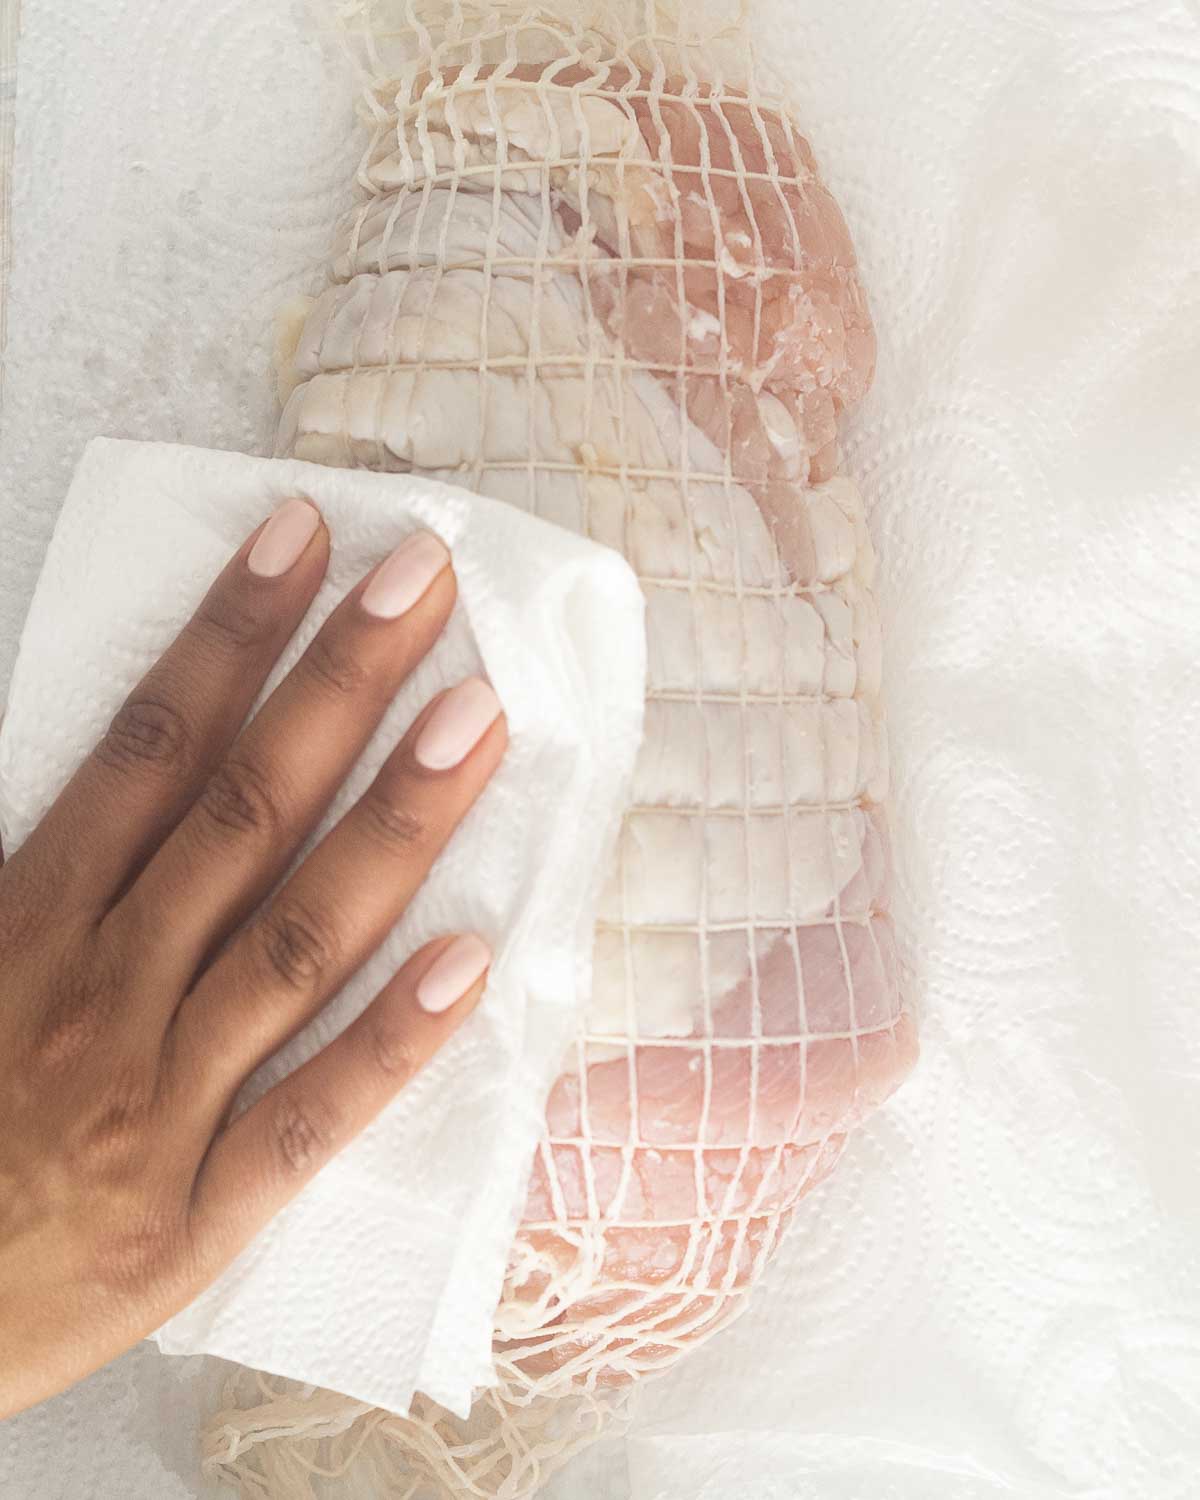 Patting dry a turkey breast with paper towel.